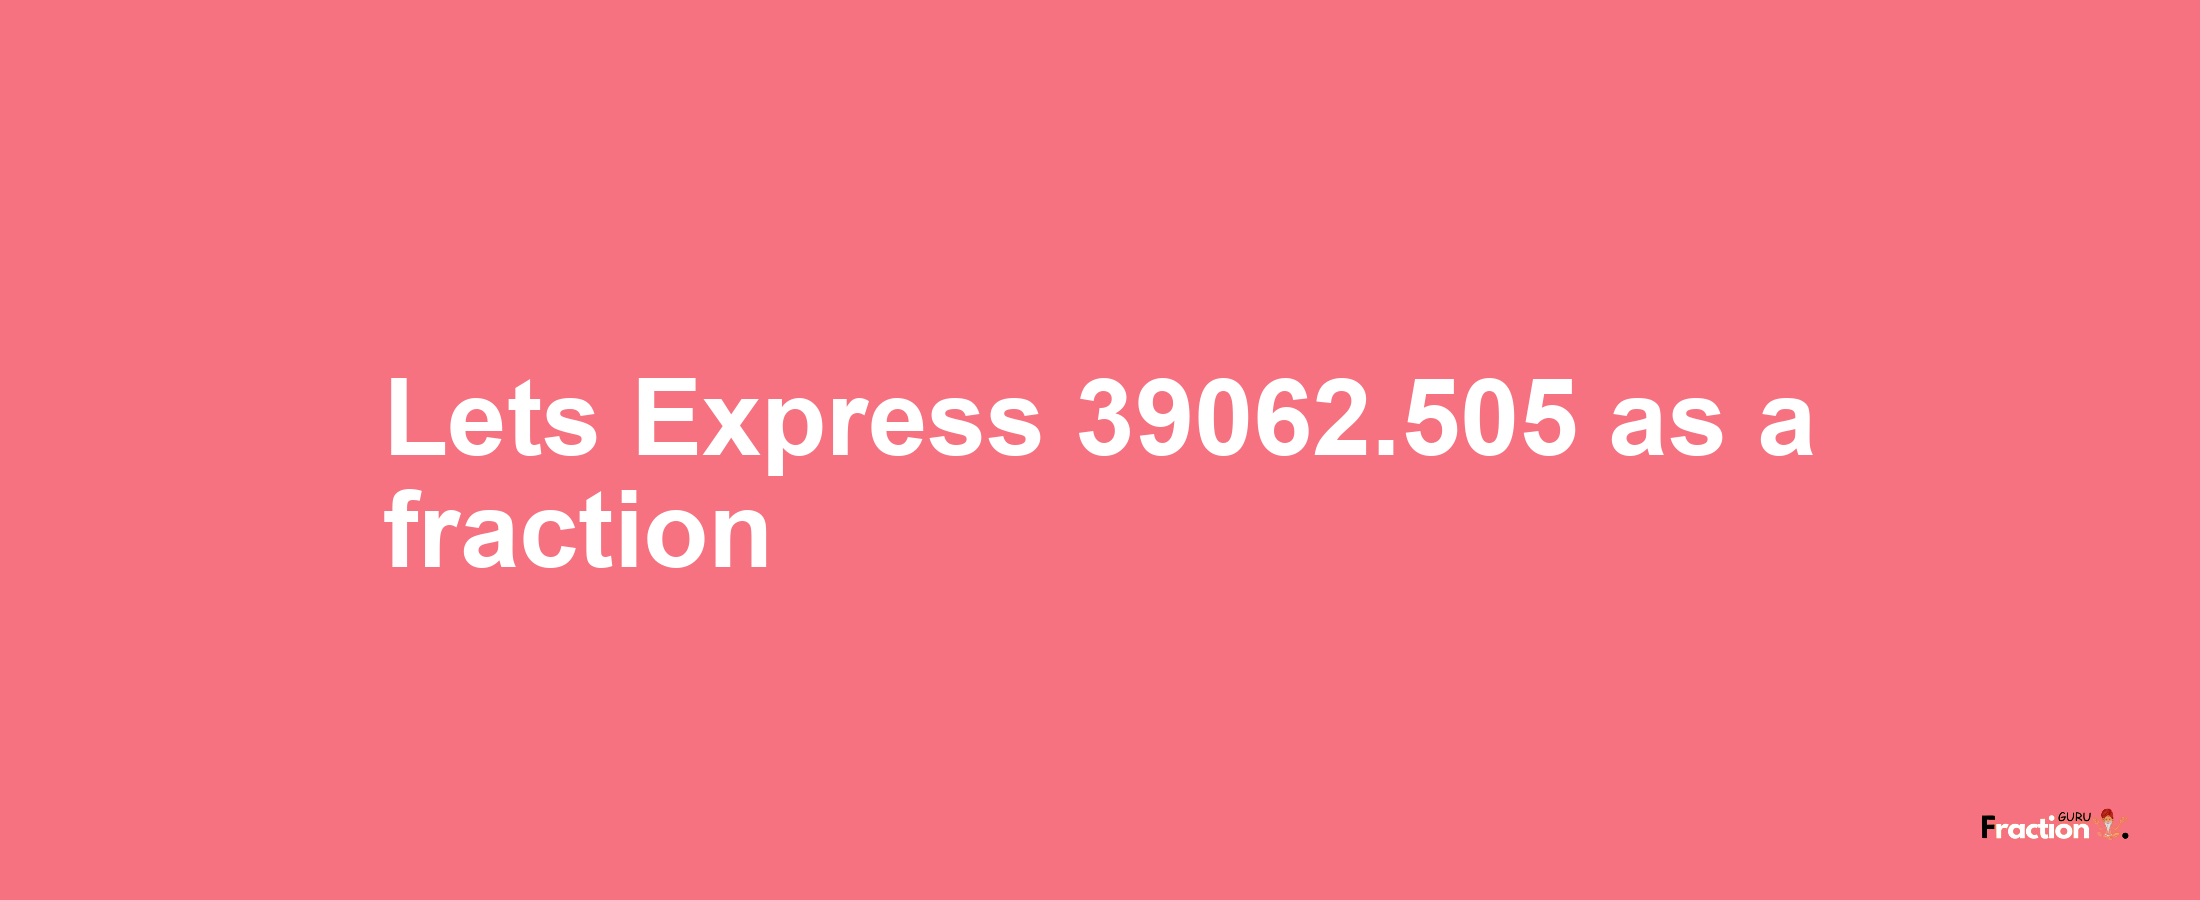 Lets Express 39062.505 as afraction